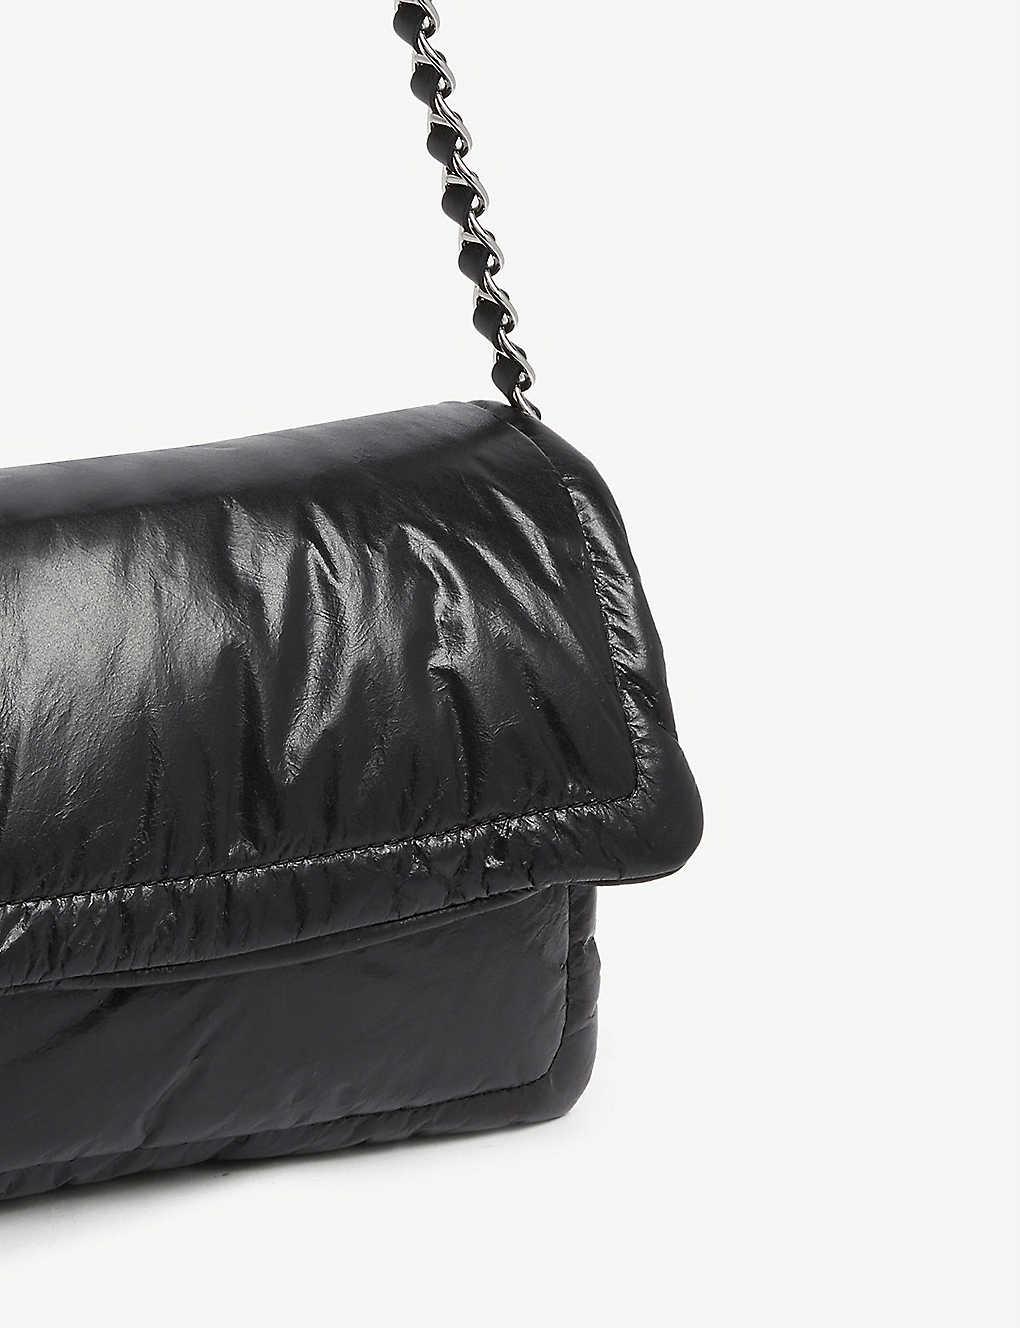 30.0% OFF on MARC JACOBS THE PILLOW BAG BLACK